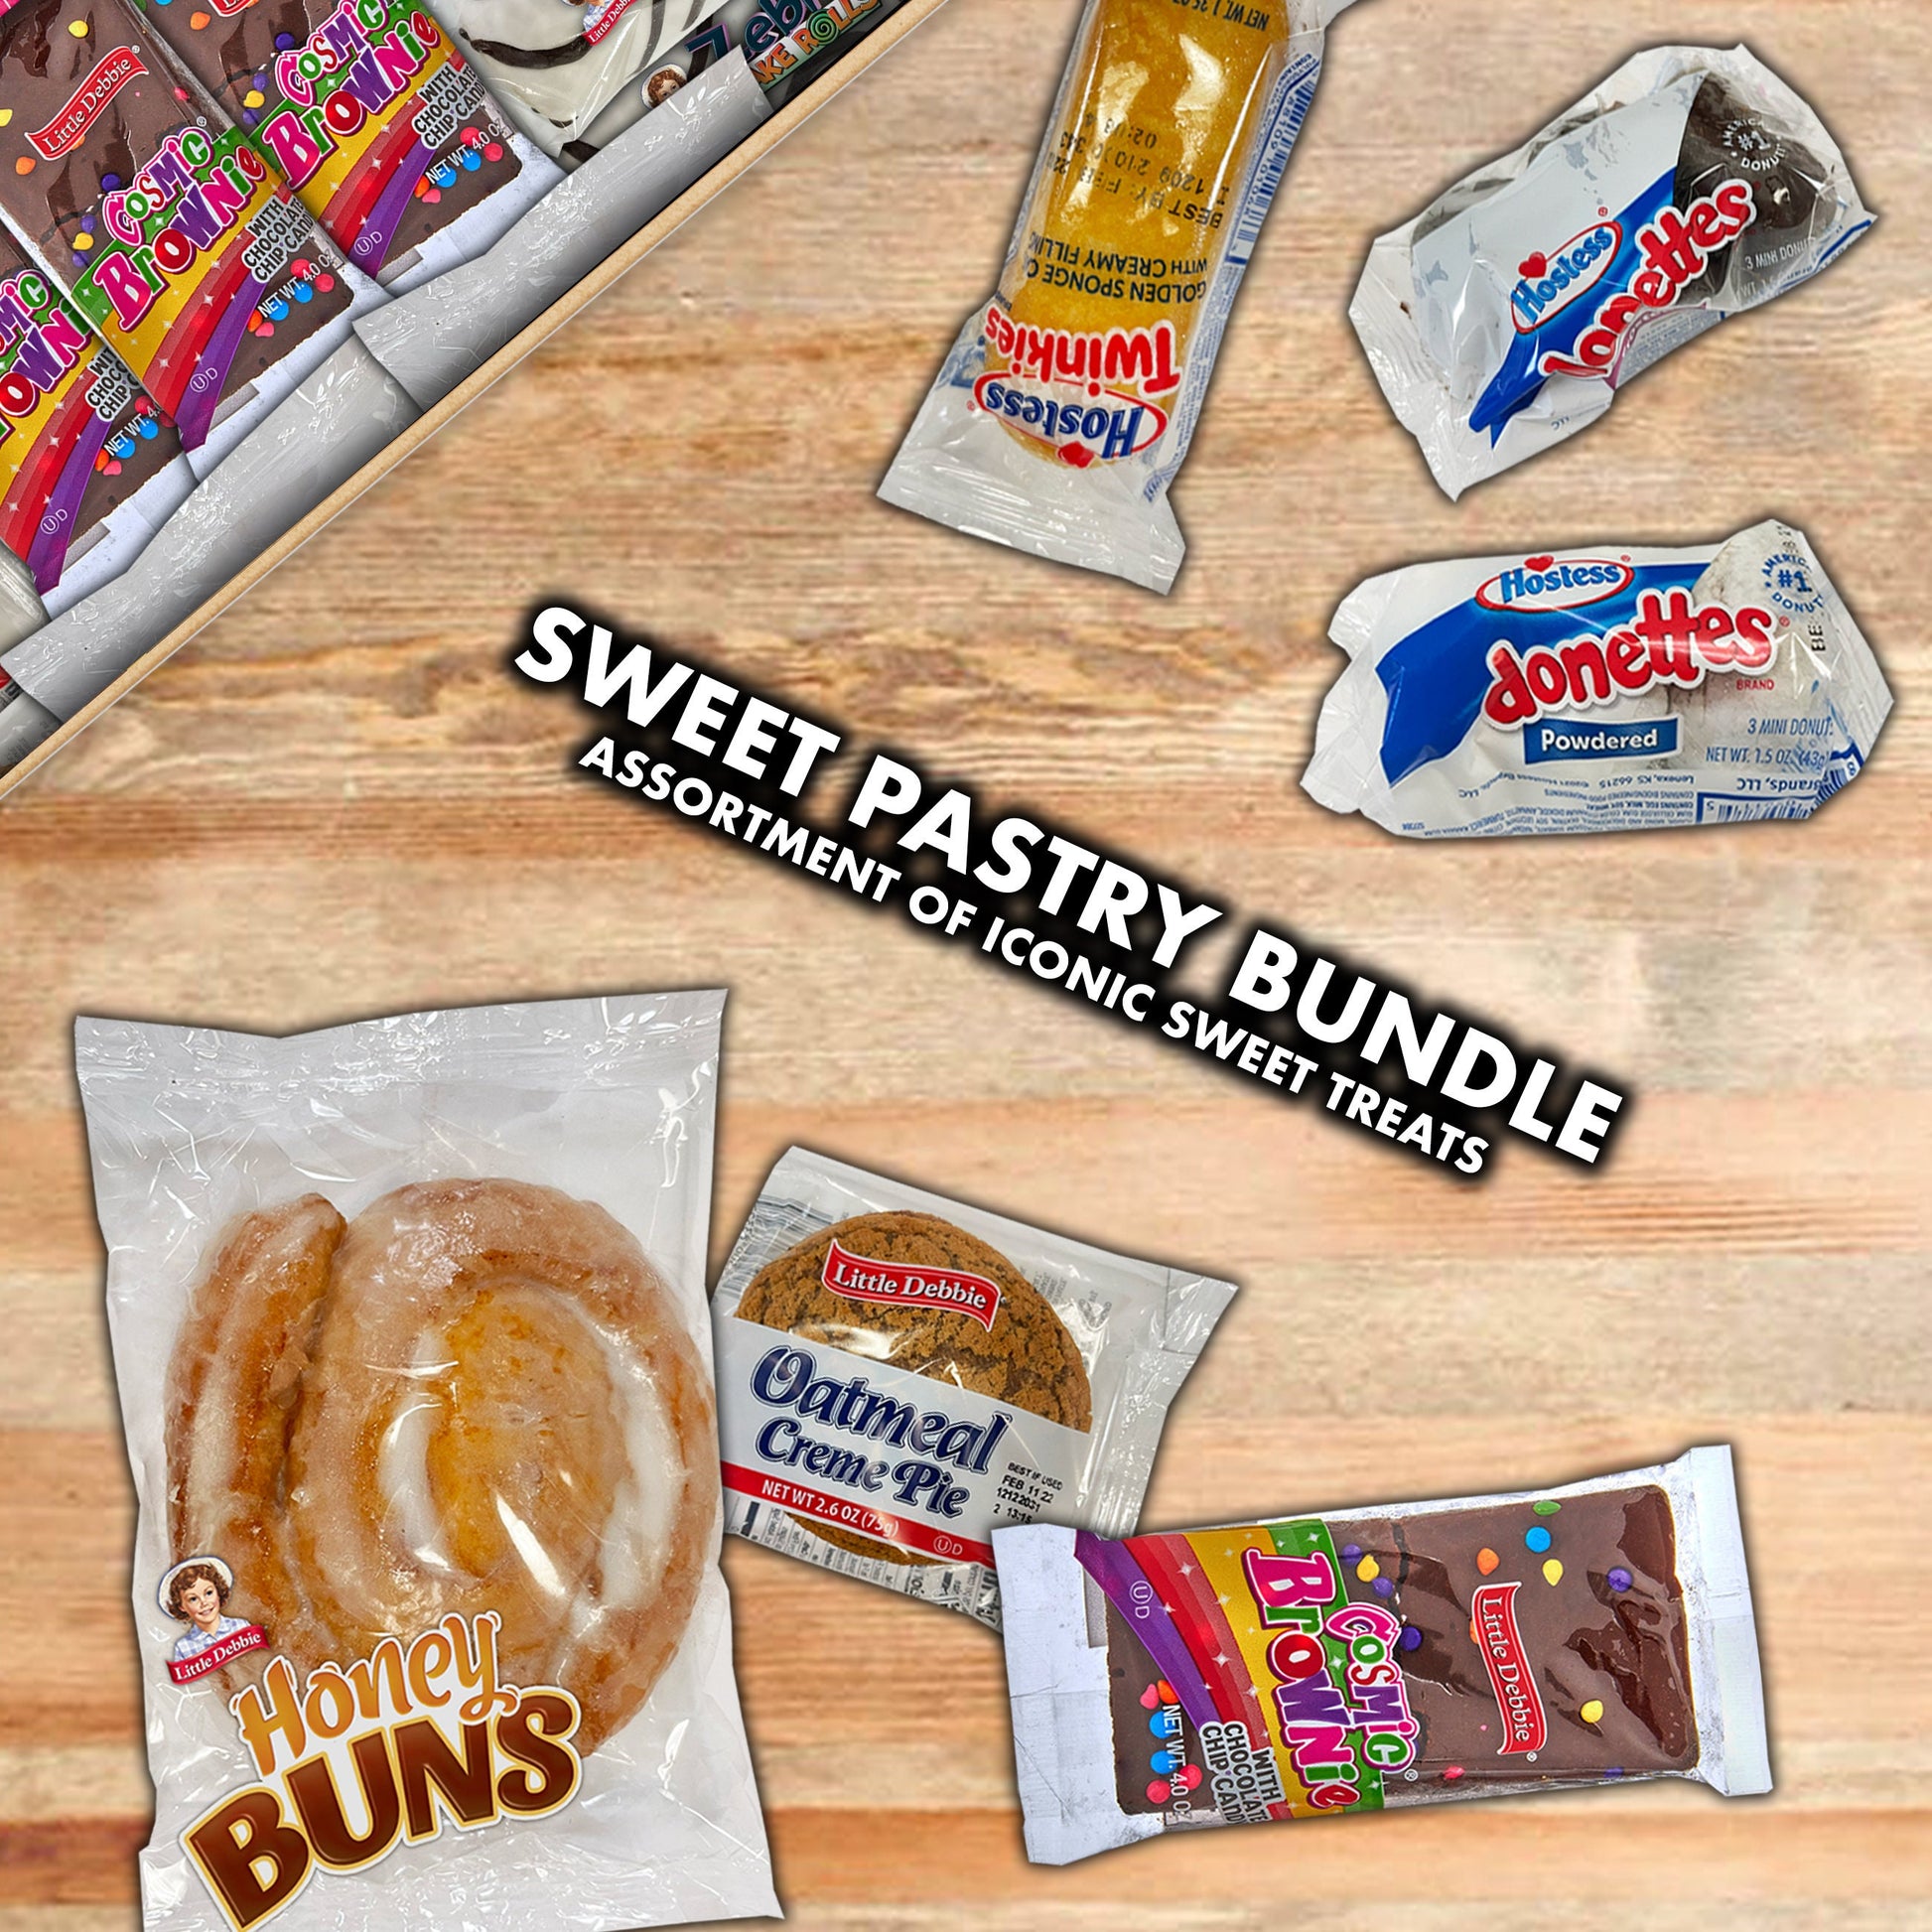 Sweet assortment of iconic sweet treats in a snack box